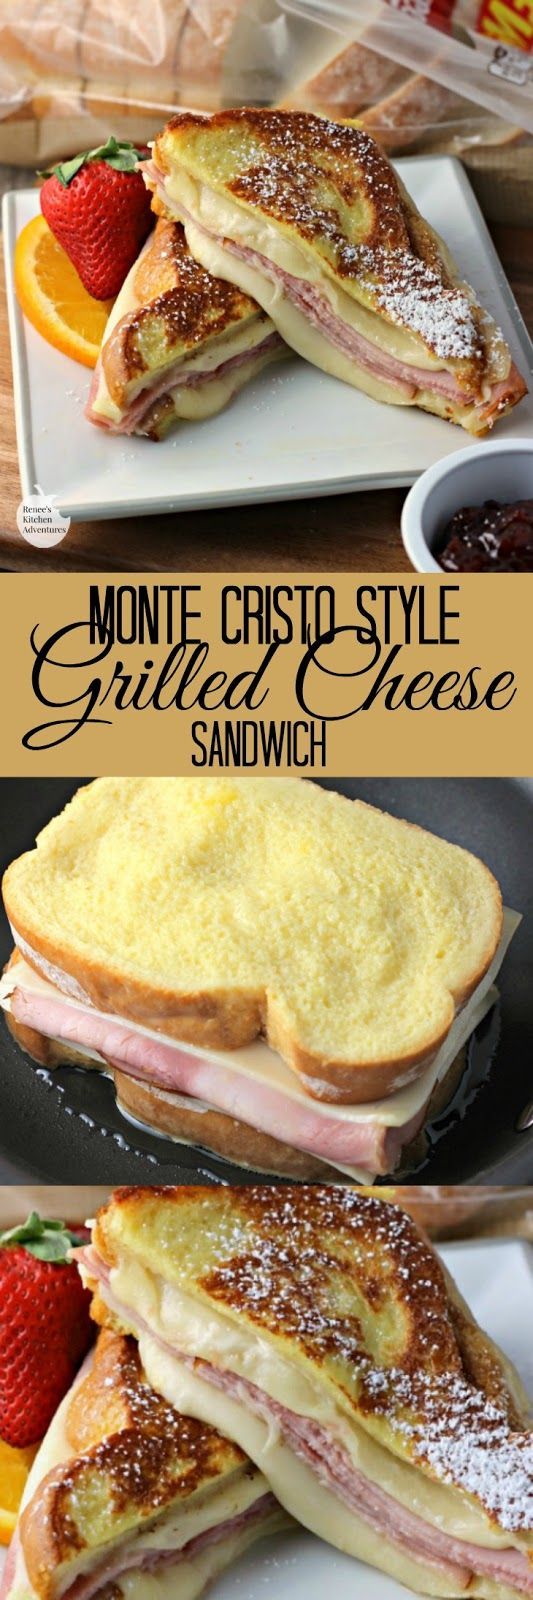 Monte Cristo Style Grilled Cheese Sandwich | by Renees Kitchen Adventures – e